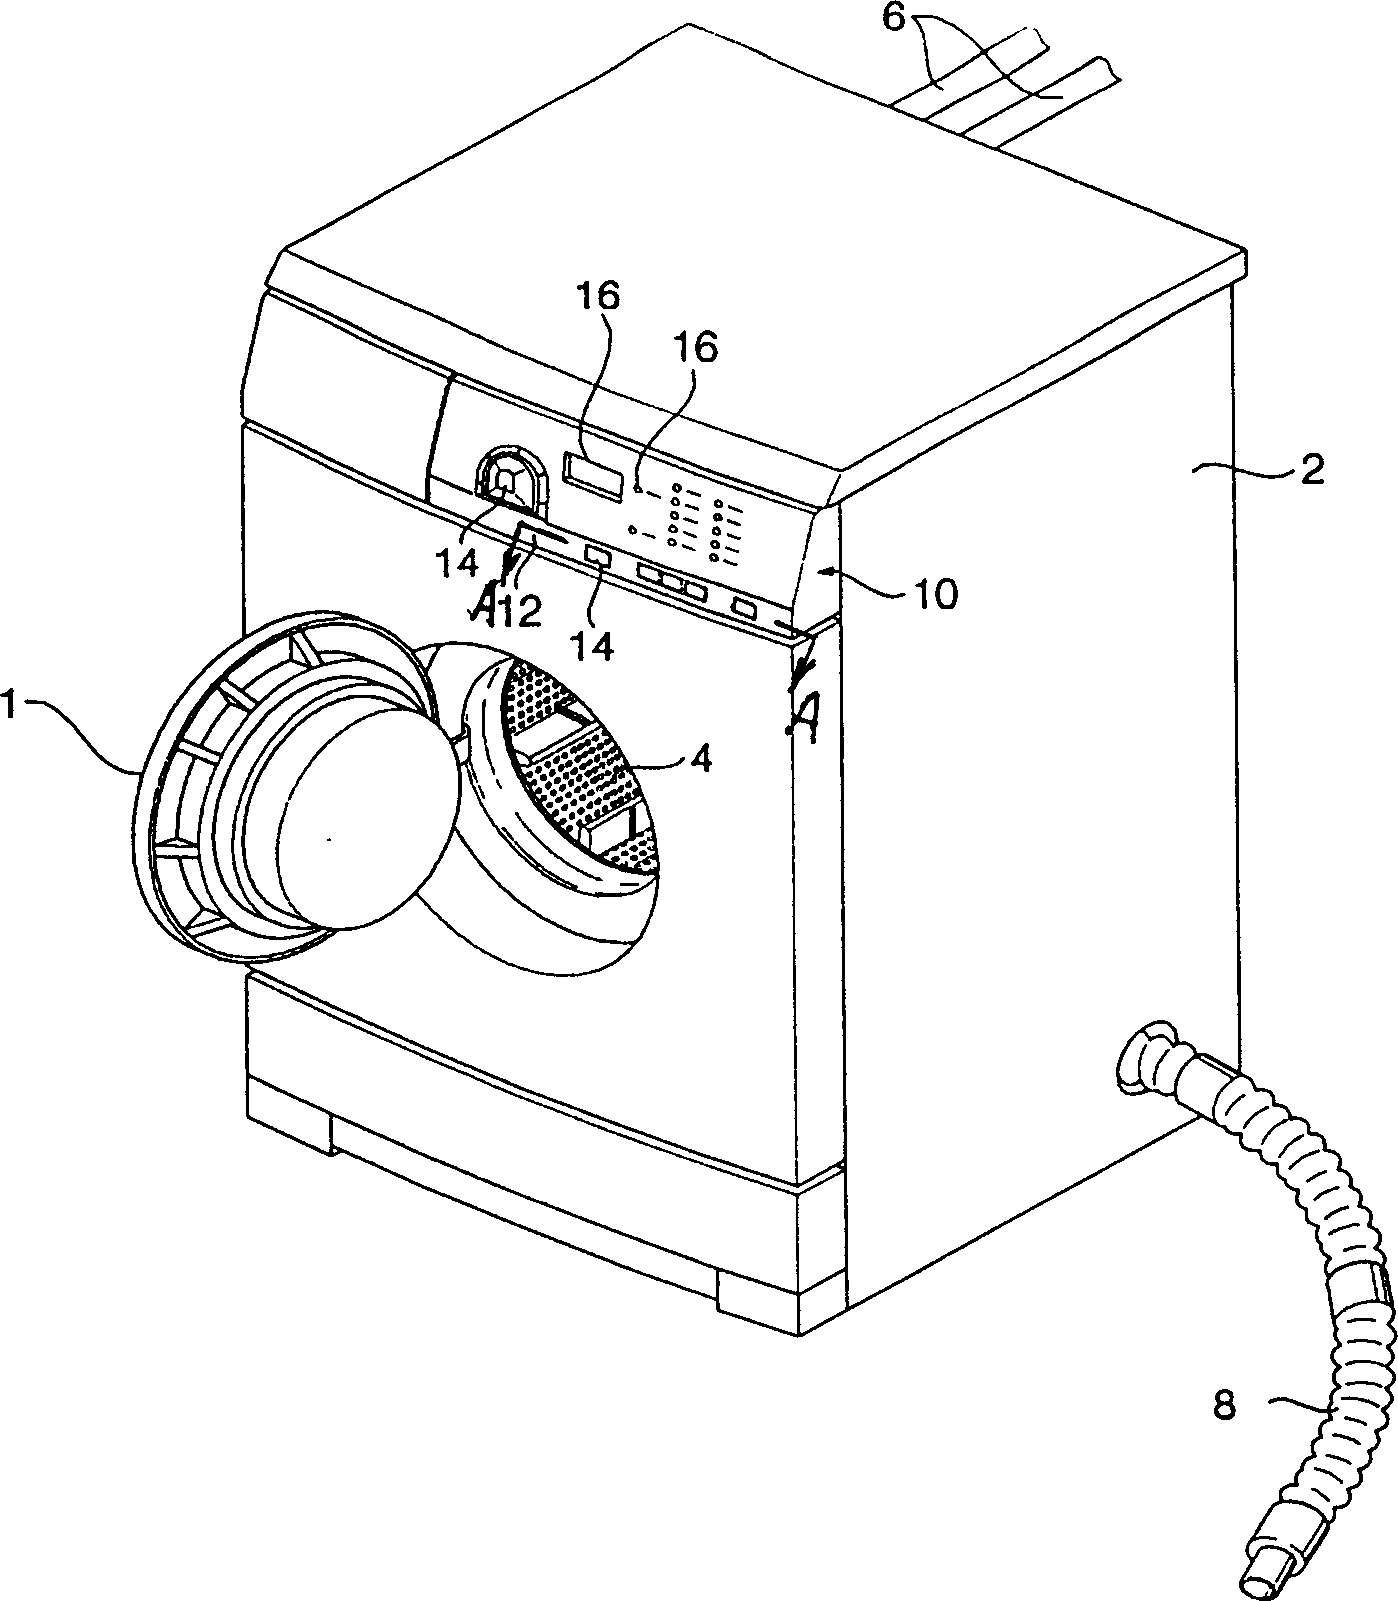 Button assembling structure of washer